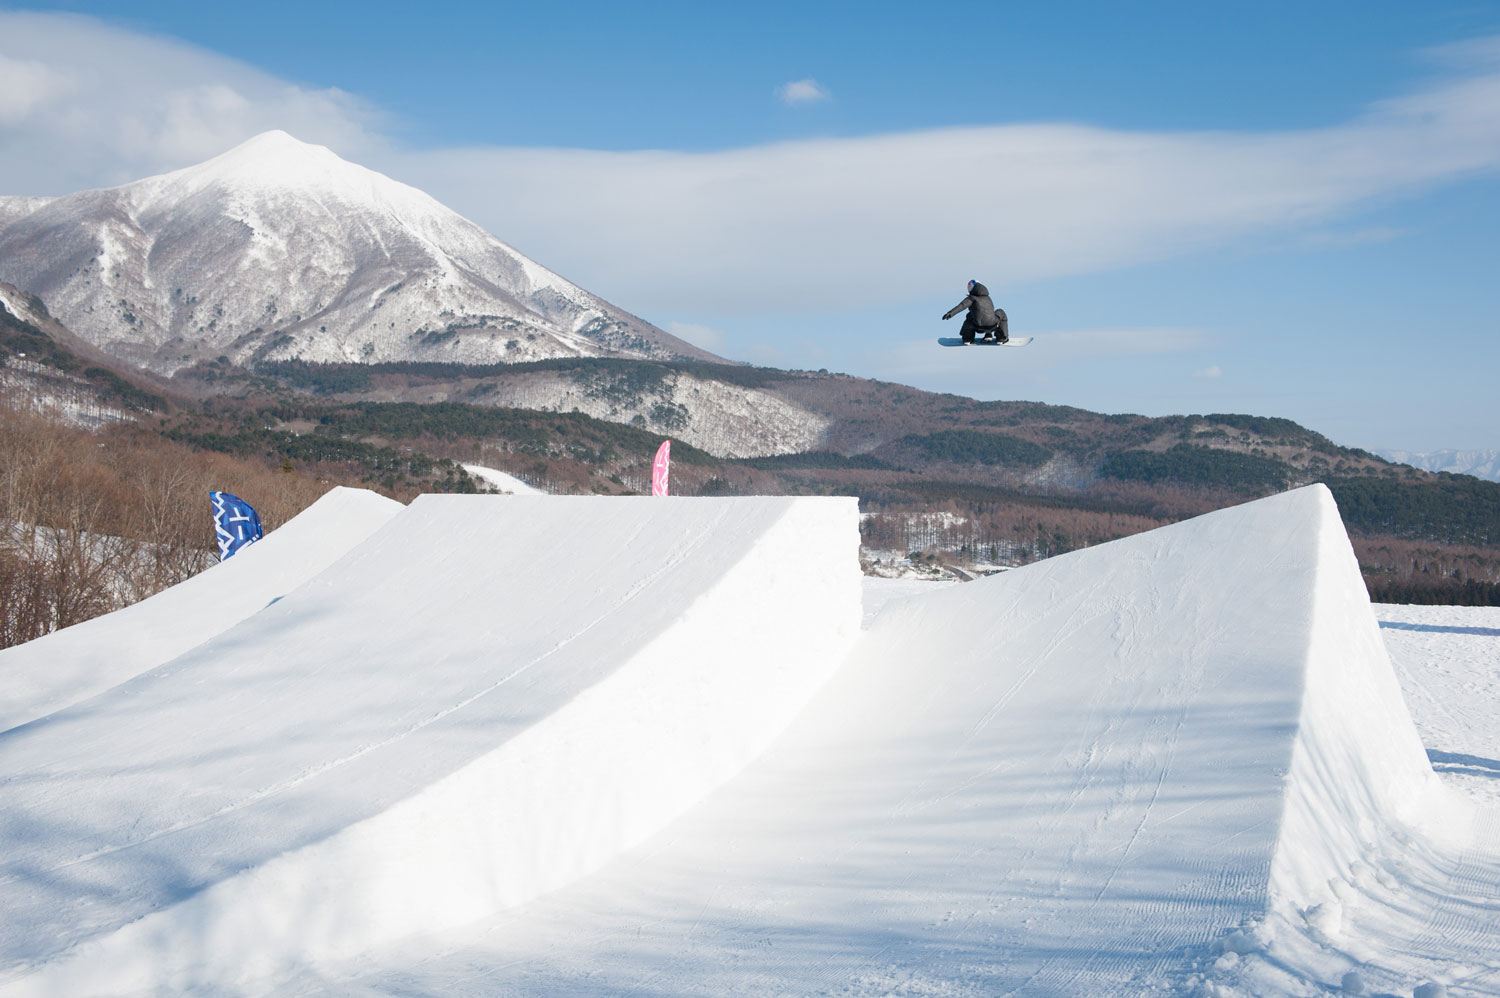 A kicker who can enjoy a magnificent jump with Mt. Bandai in the background